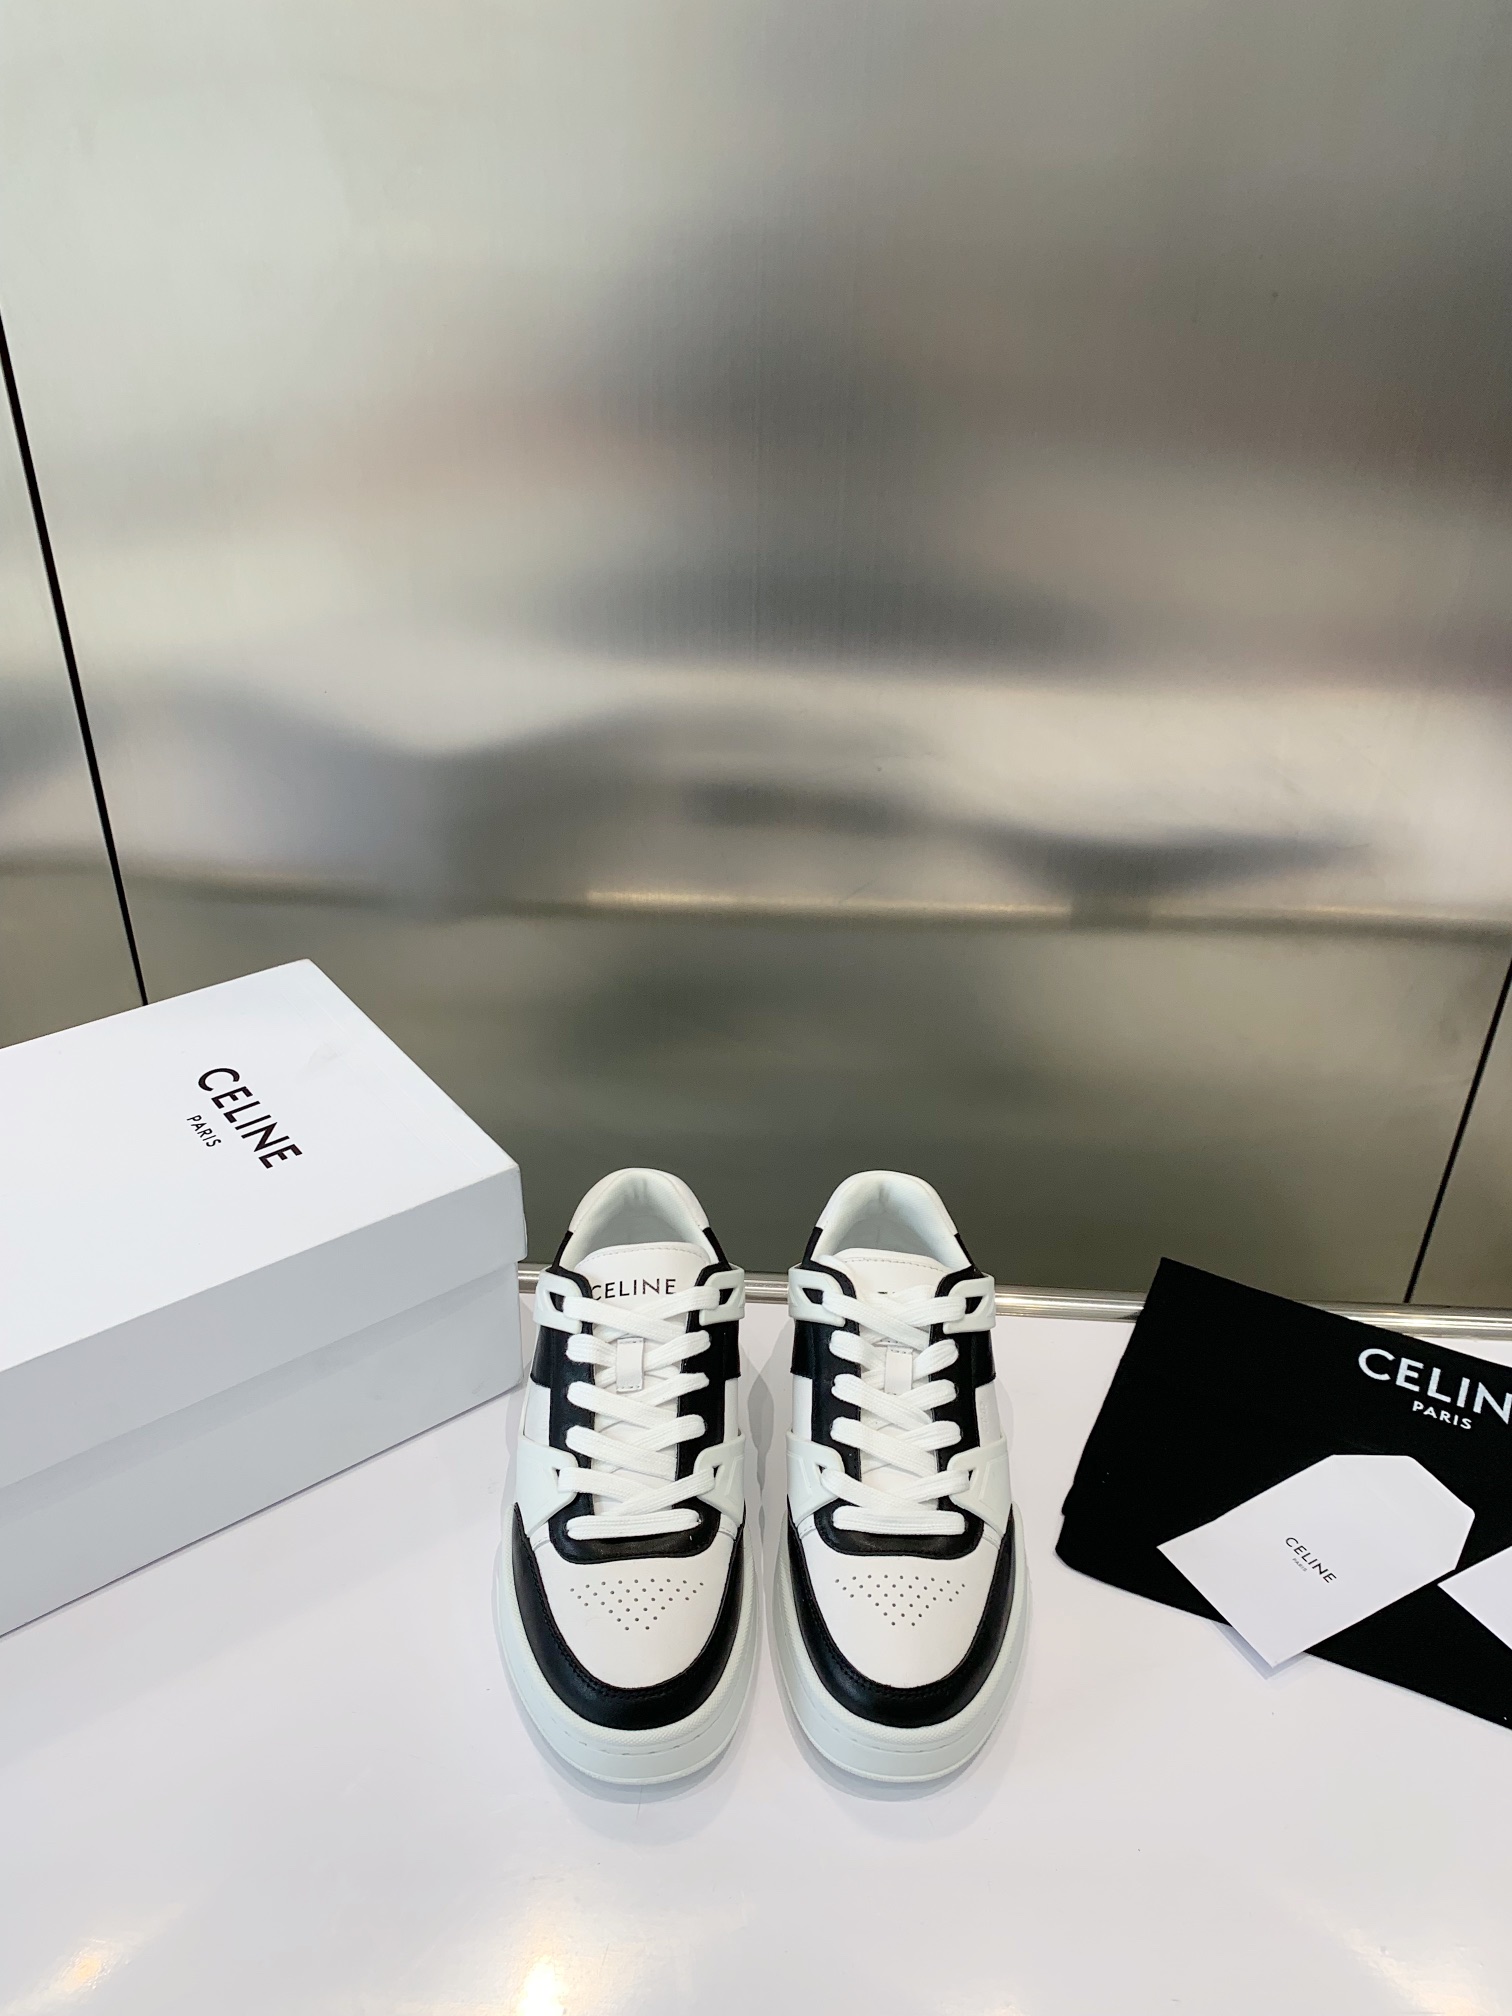 Celine Skateboard Shoes Sneakers White Unisex Cowhide Fabric Sheepskin TPU Spring/Summer Collection Fashion Casual